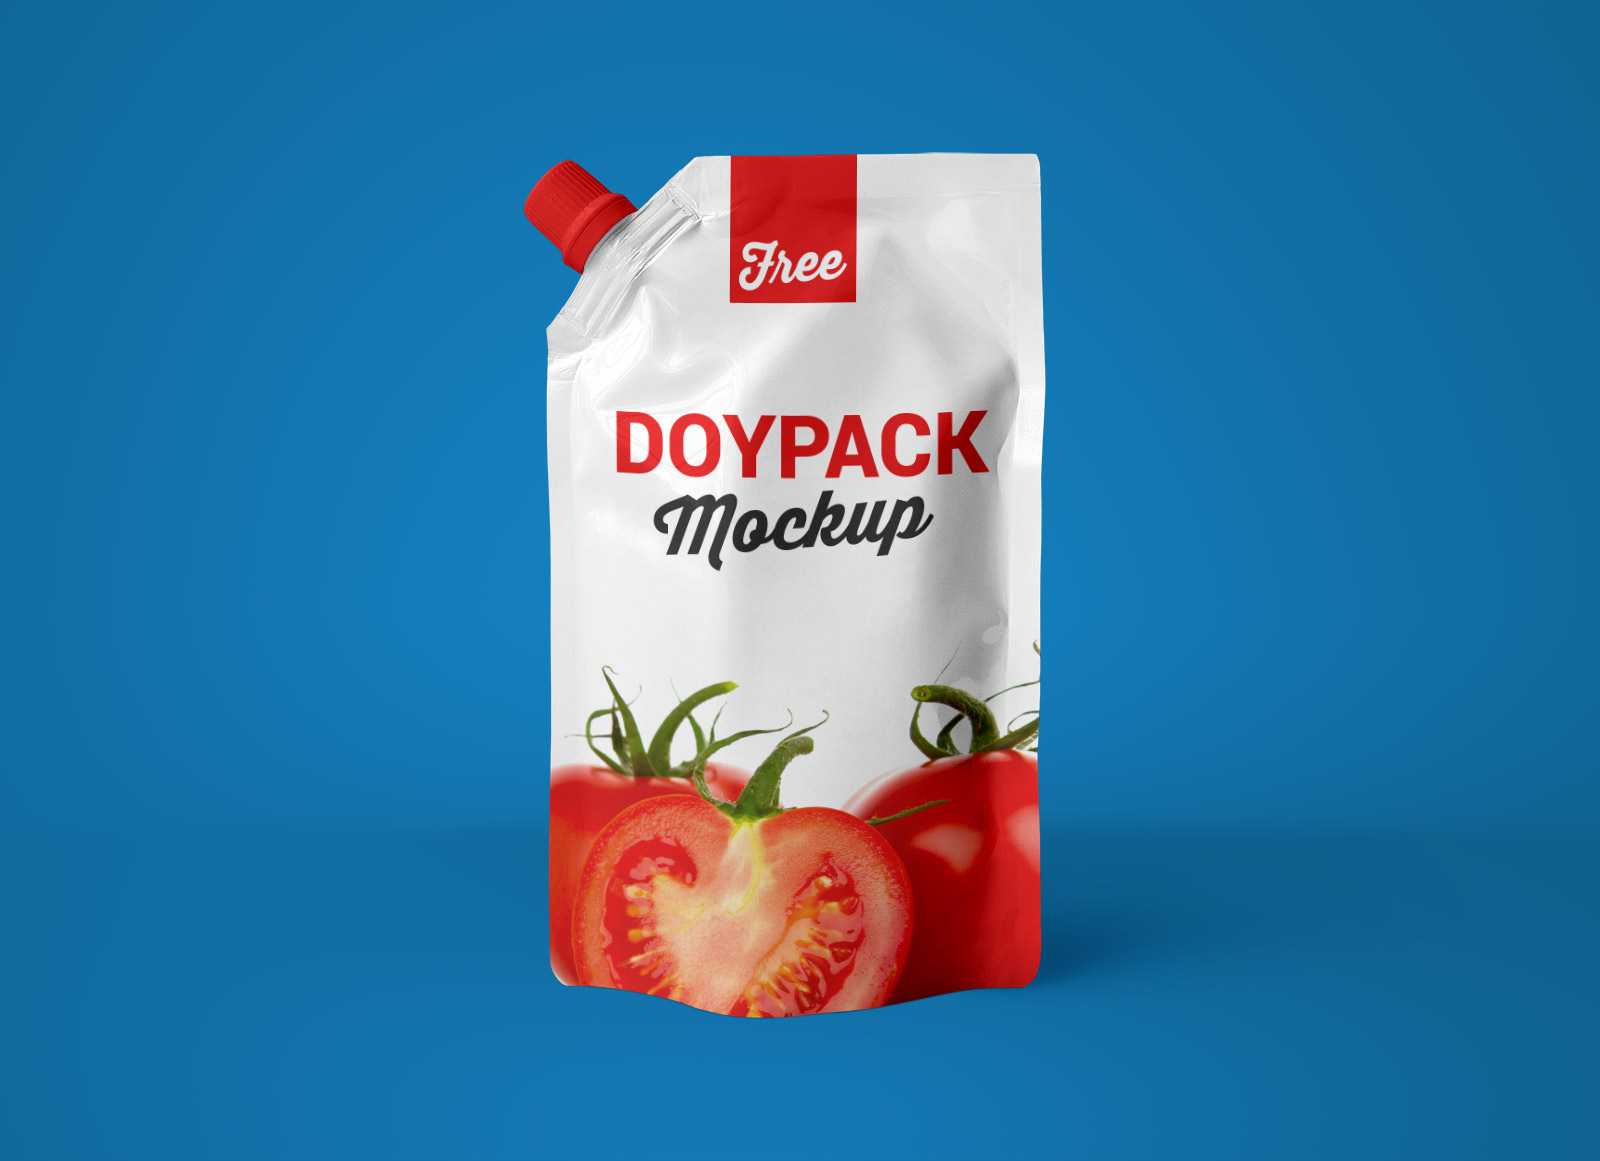 DoyPack Stand-up-Beutelverpackungsmodelle